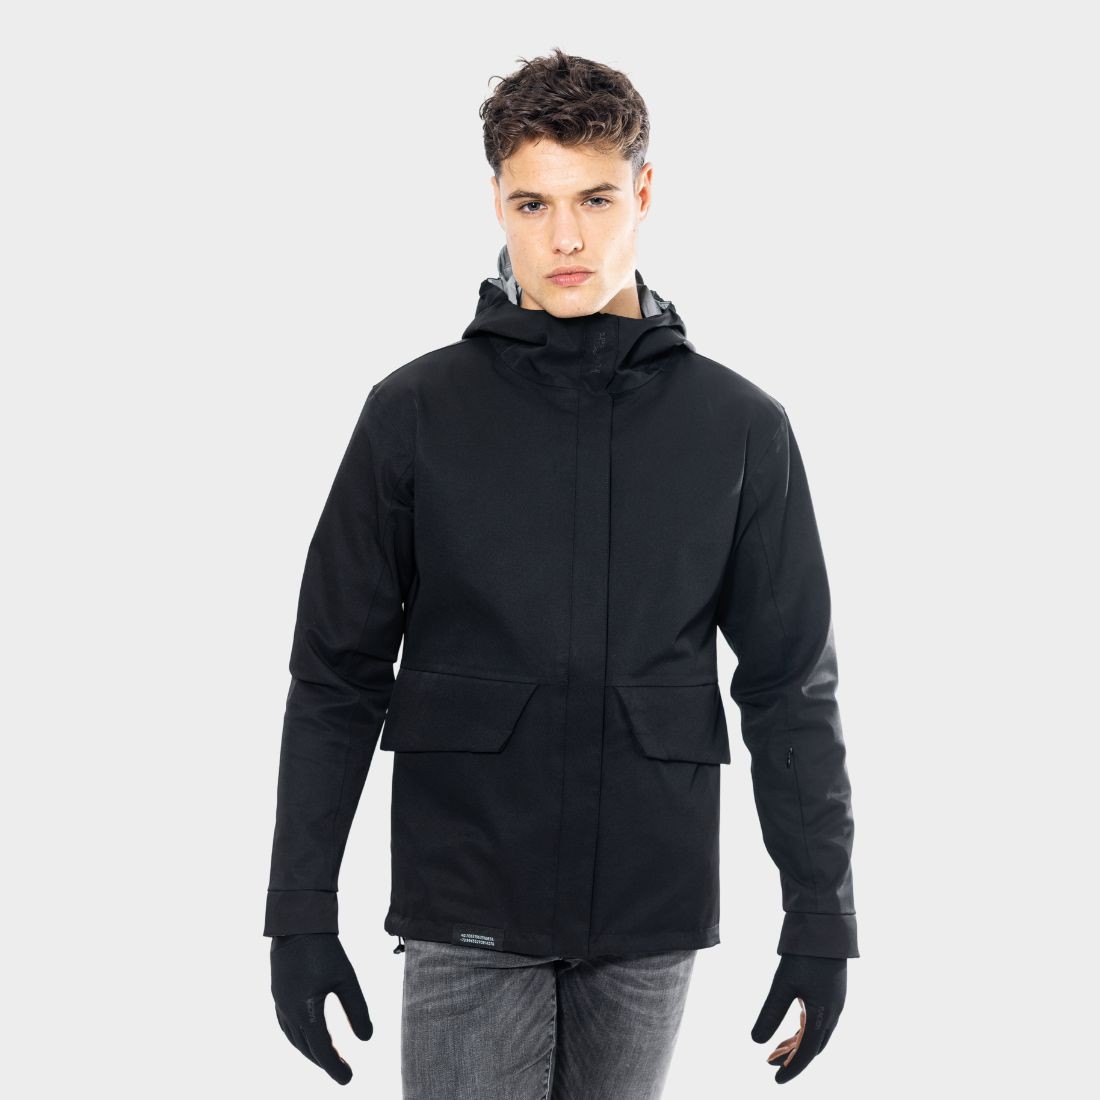 RACER® - Chaqueta impermeable, reflectante y reversible THE CITYLIGHT -  PROYECTO URBANO